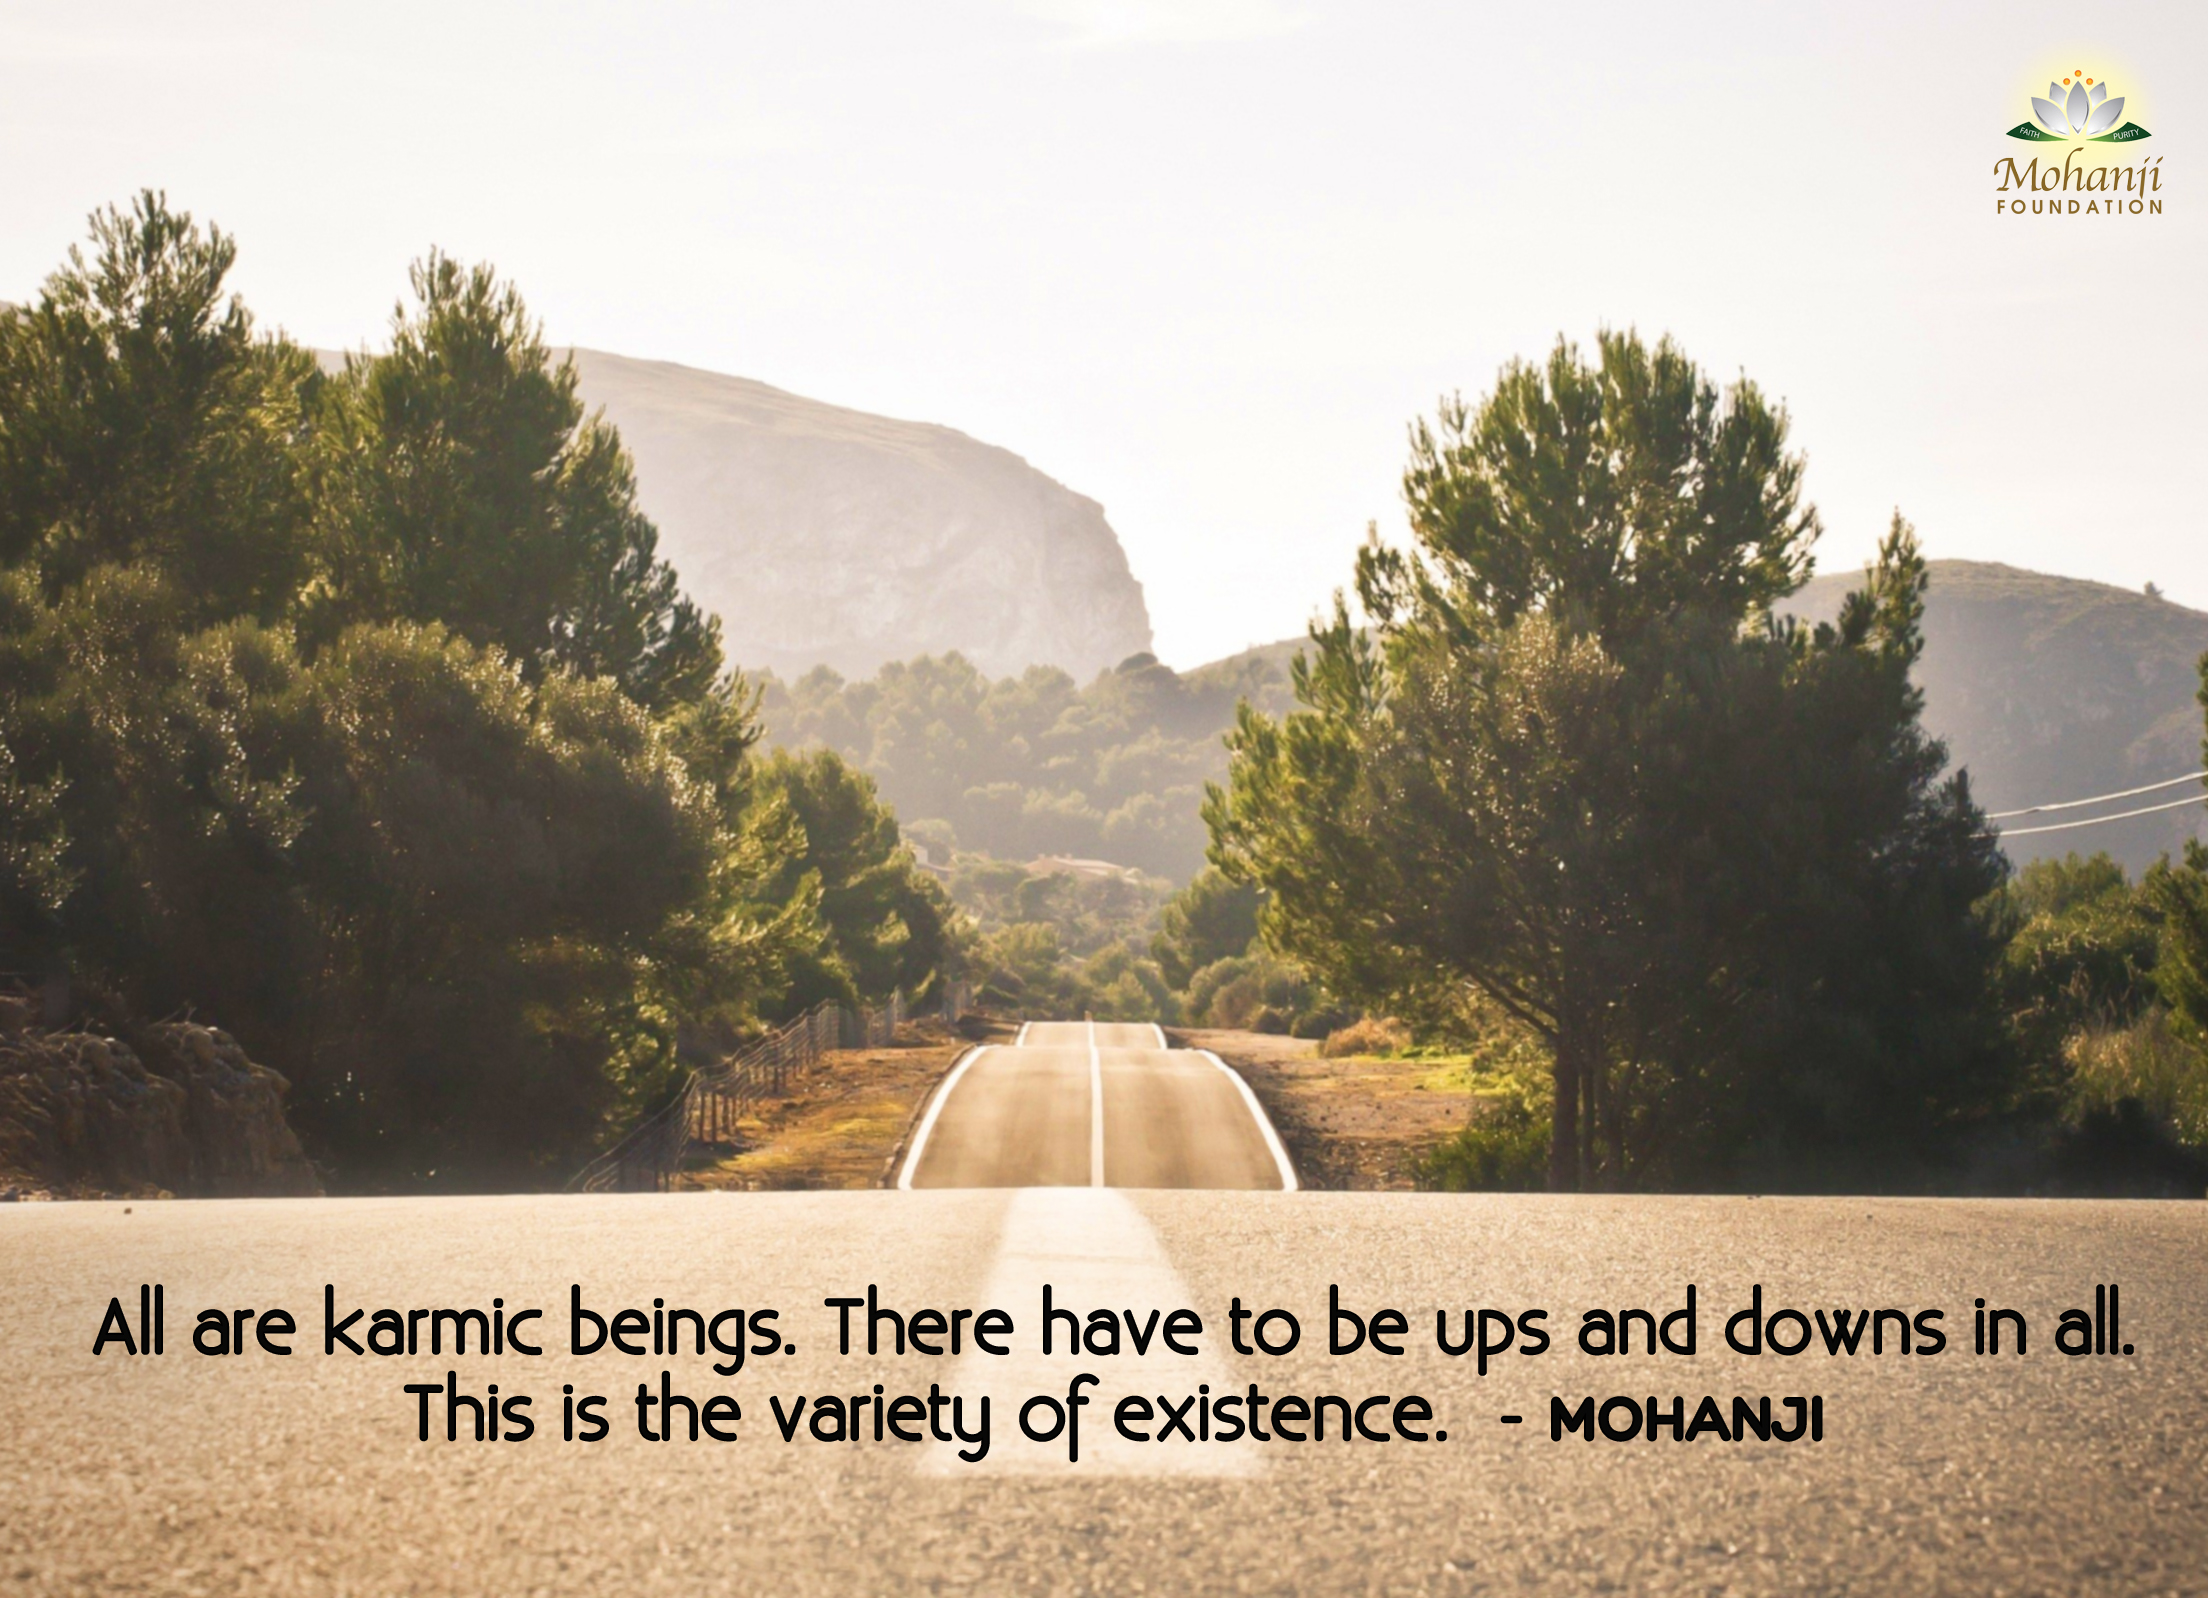 All are karmic beings. There have to be ups and downs in all. This is the variety of existence.  - Mohanji